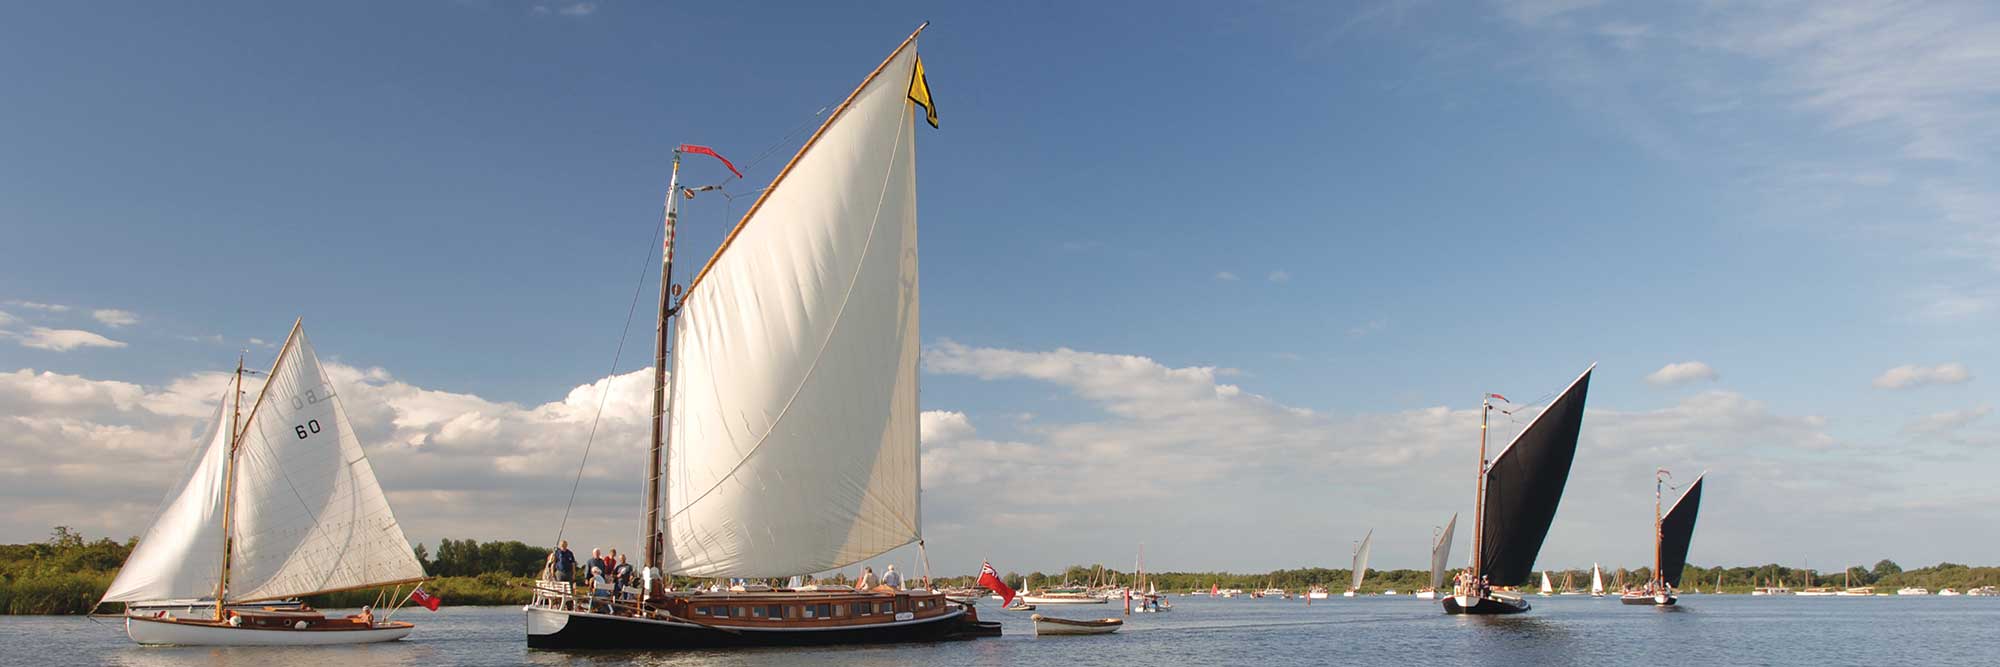 Large sailed wooden boats sailing on the Broads